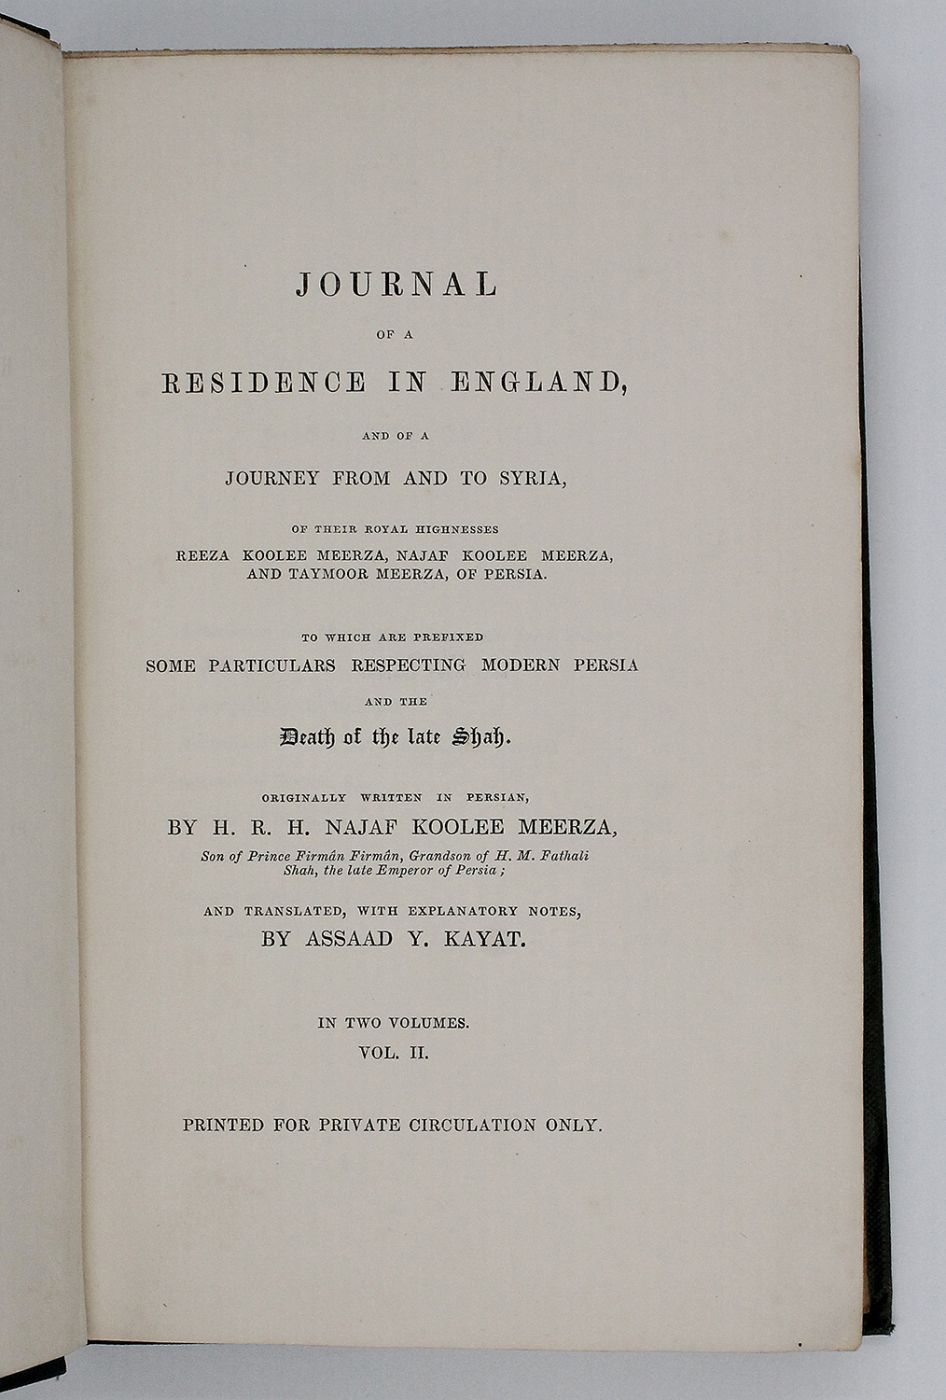 JOURNAL OF A RESIDENCE IN ENGLAND, And of a Journey from and to Syria of Their Royal Highnesses Reeza Koolee Meerza, Najaf Koolee Meerza, and Taymoor Meerza, of Persia. -  image 5